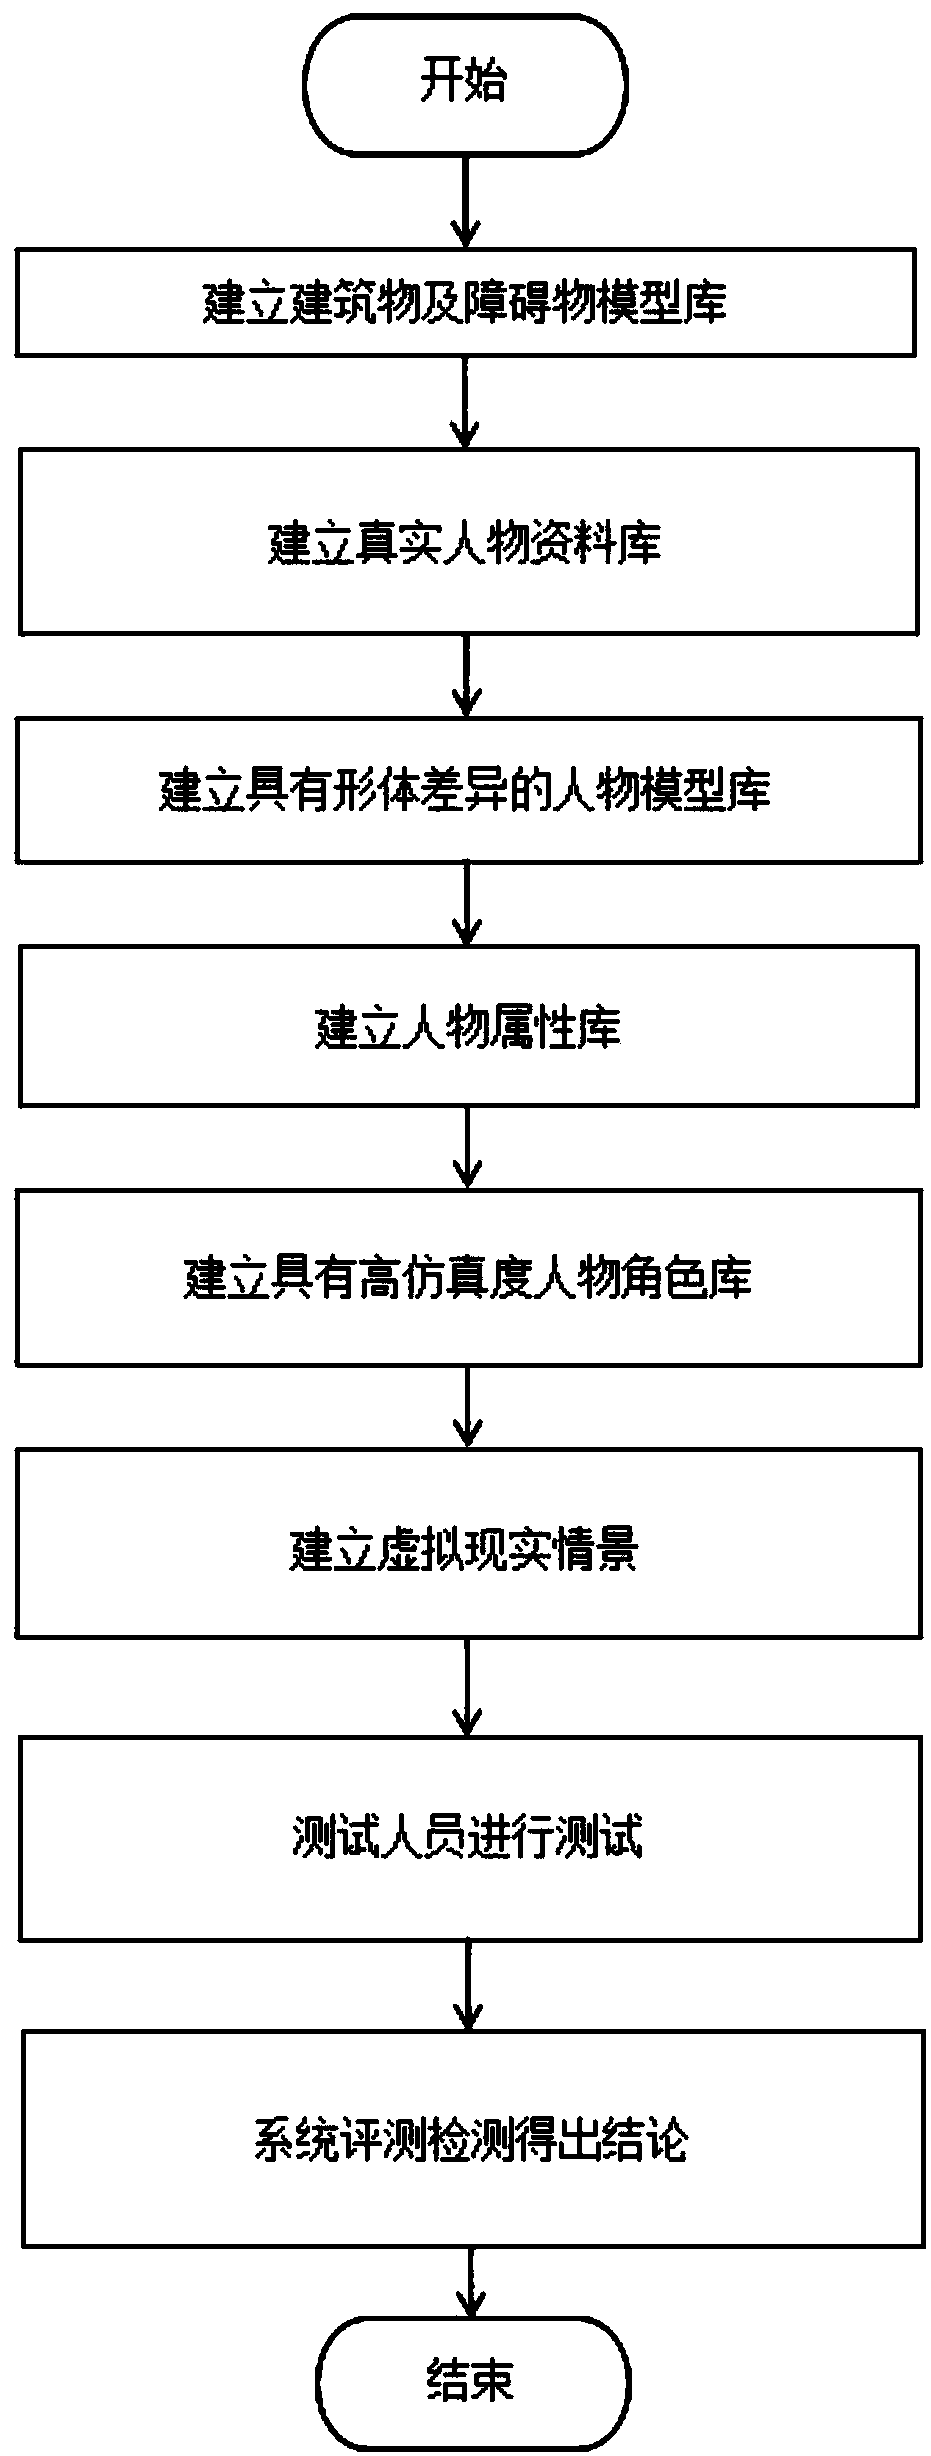 Virtual reality based crowd simulation method and system